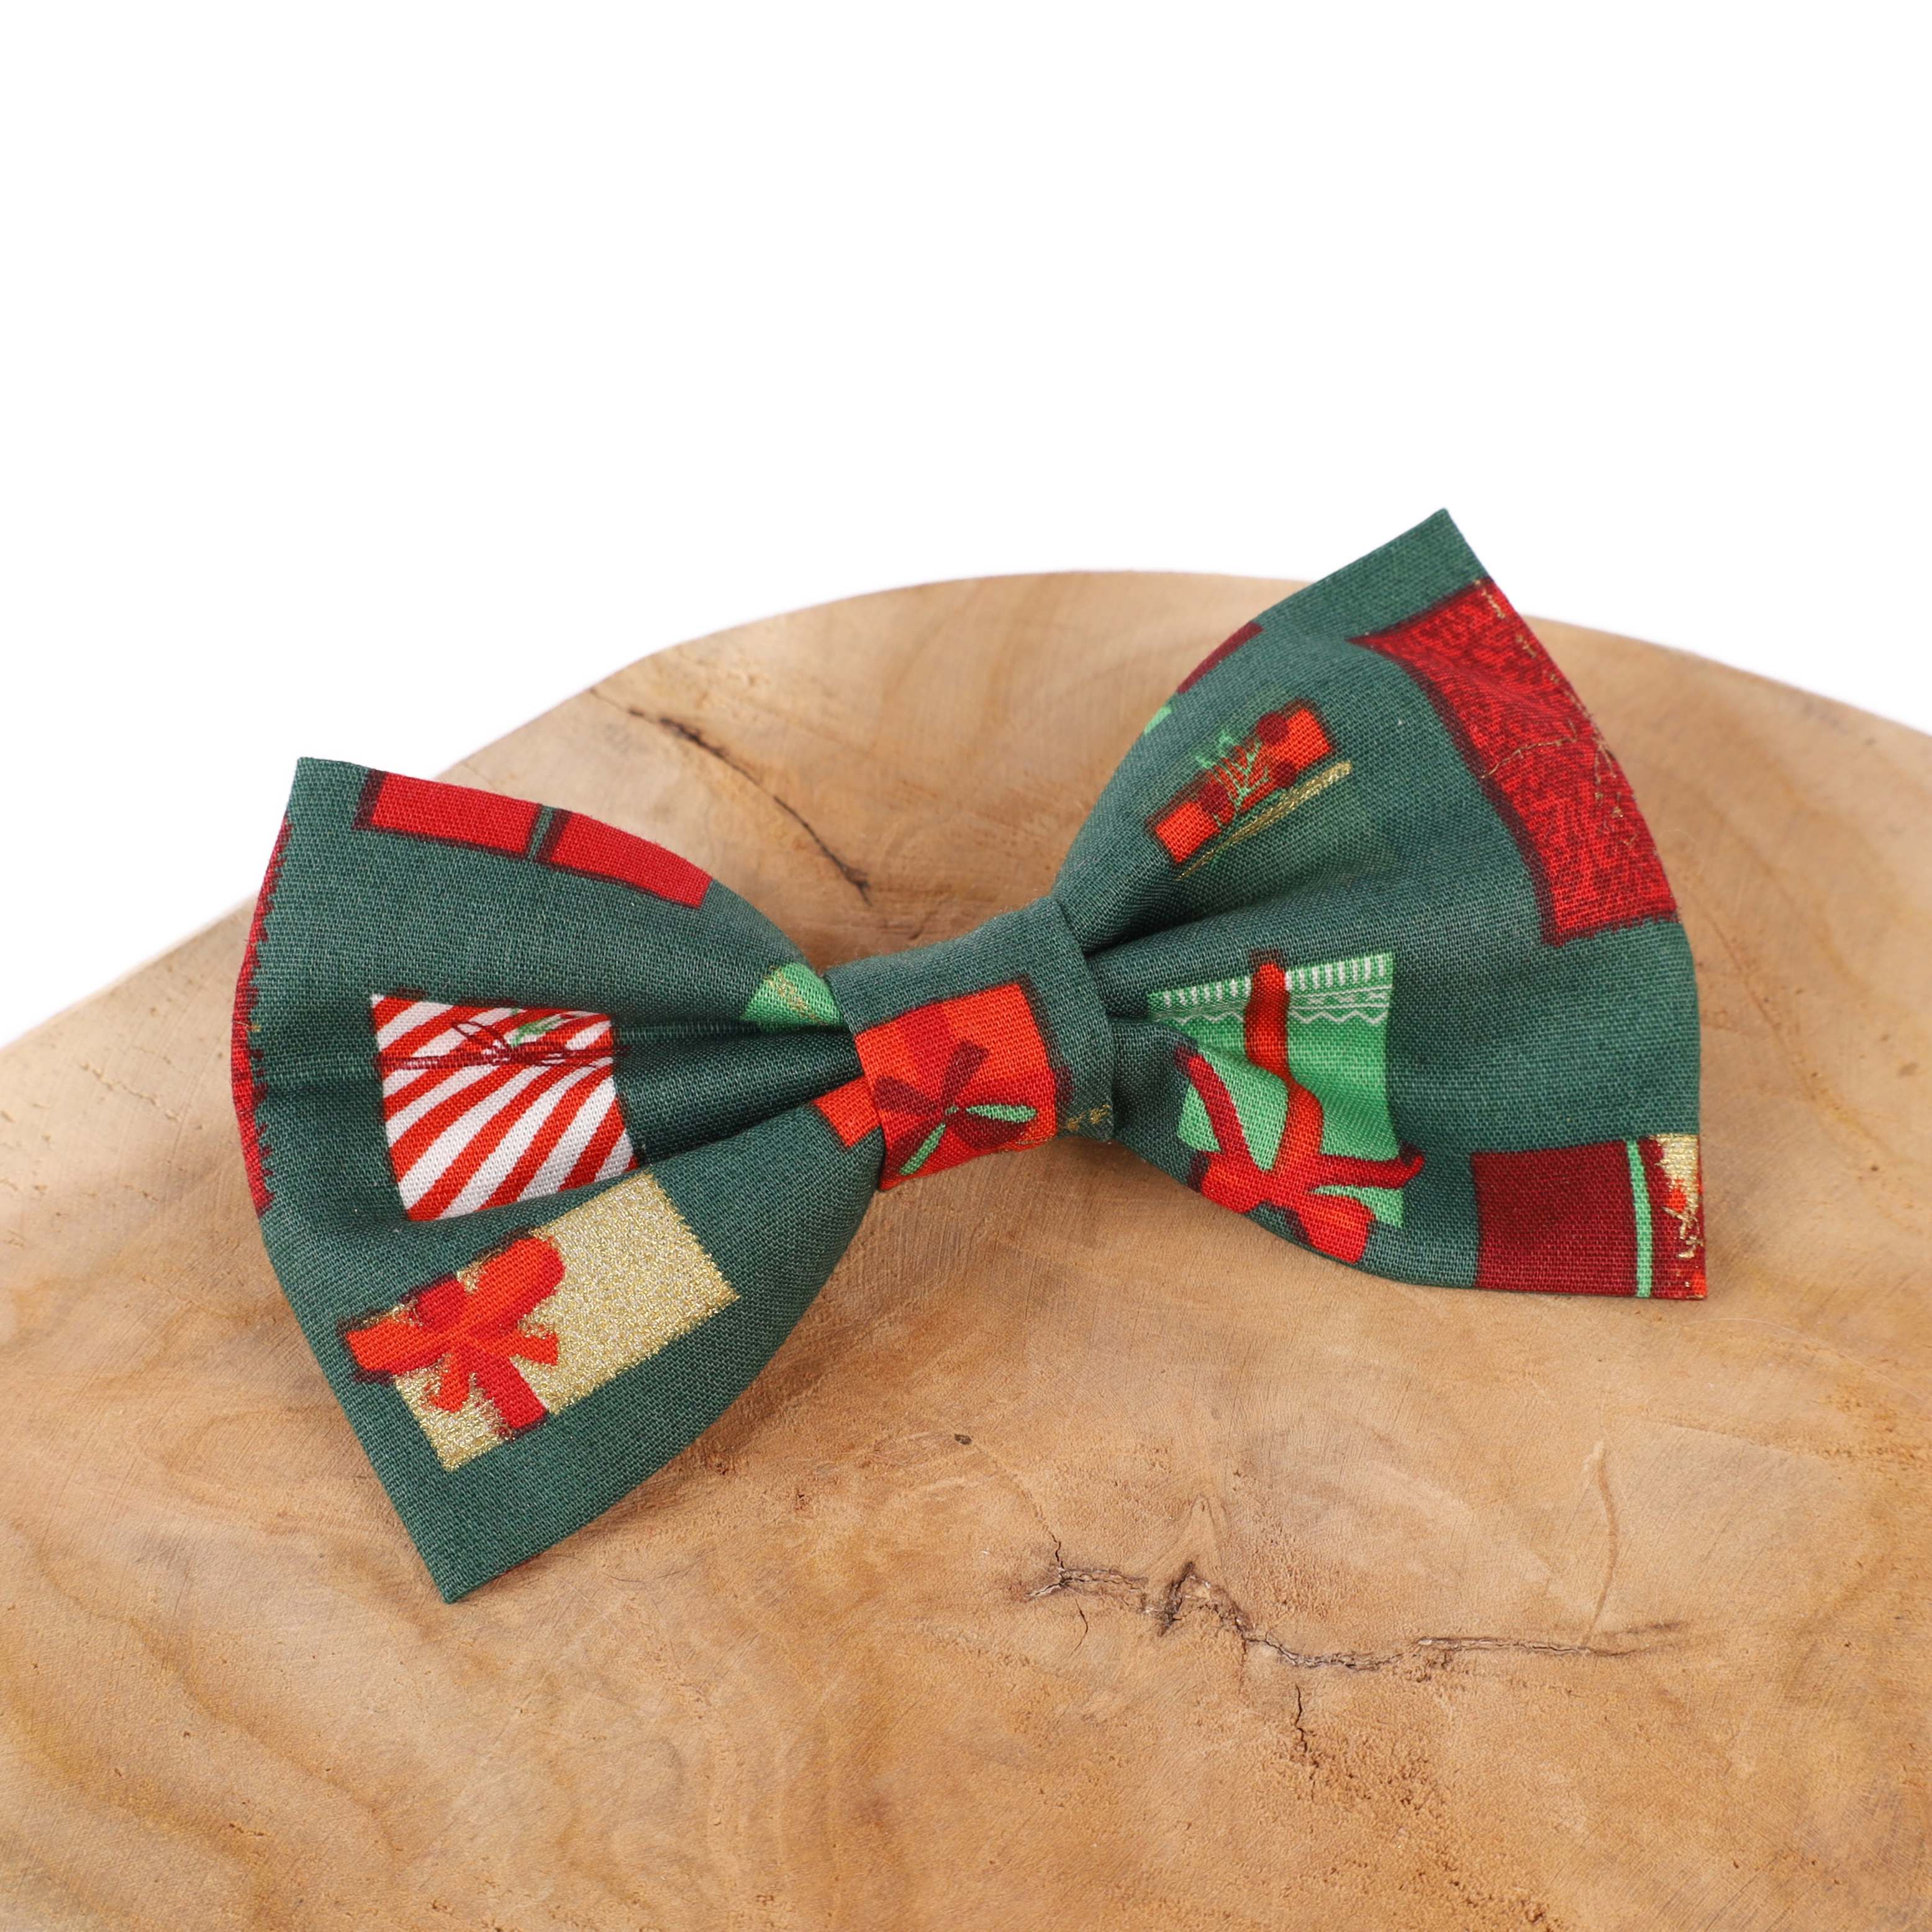 Bow tie - A gift for you